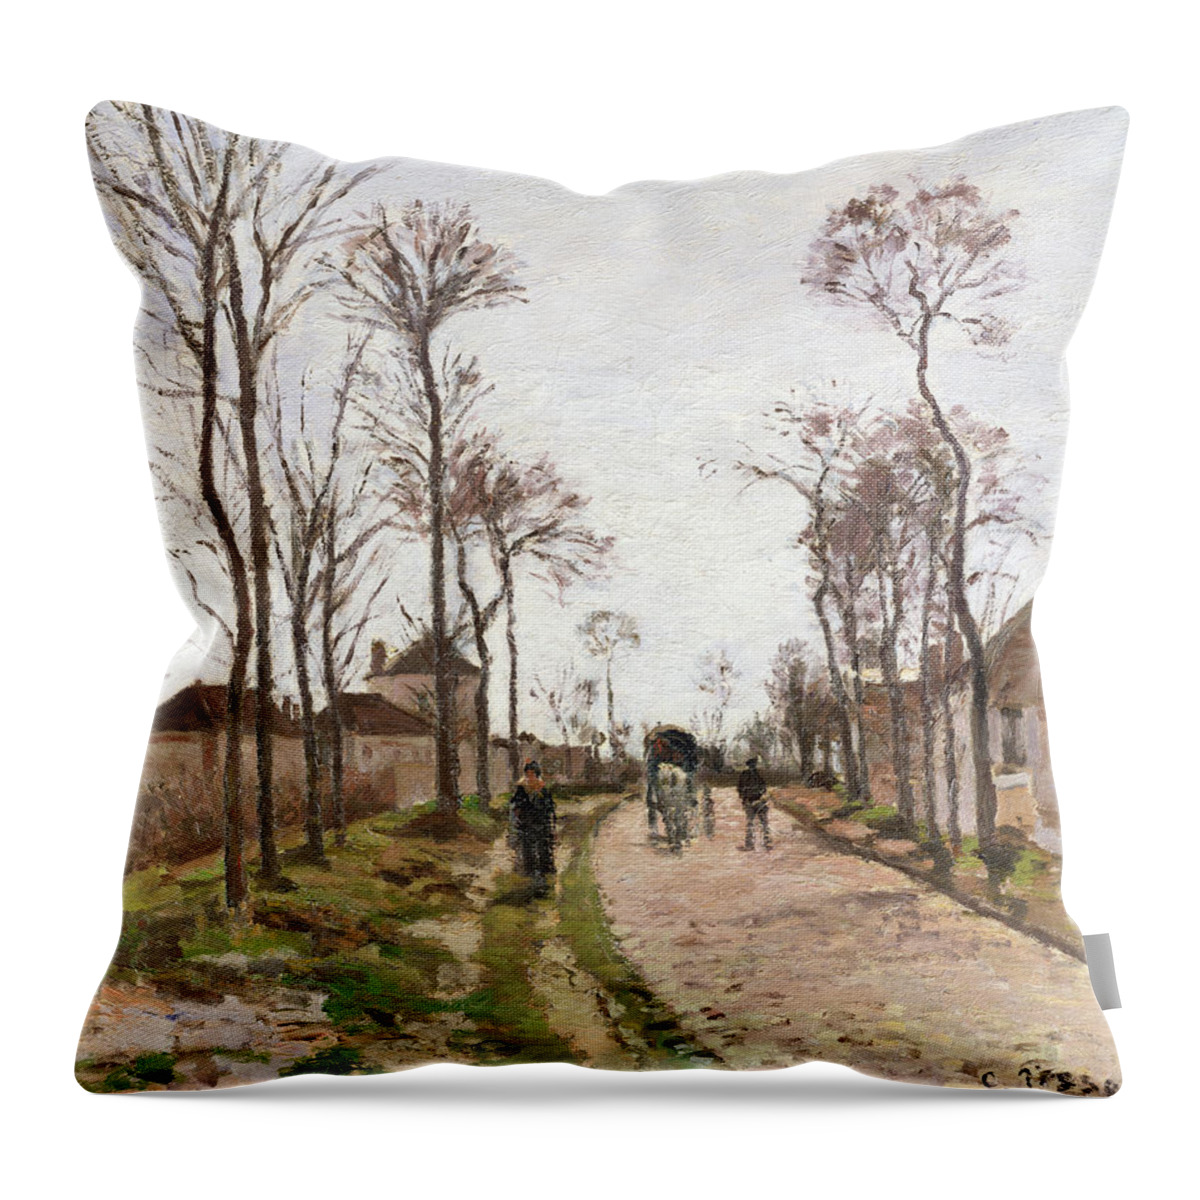 The Throw Pillow featuring the painting The Road to Saint Cyr at Louveciennes by Camille Pissarro